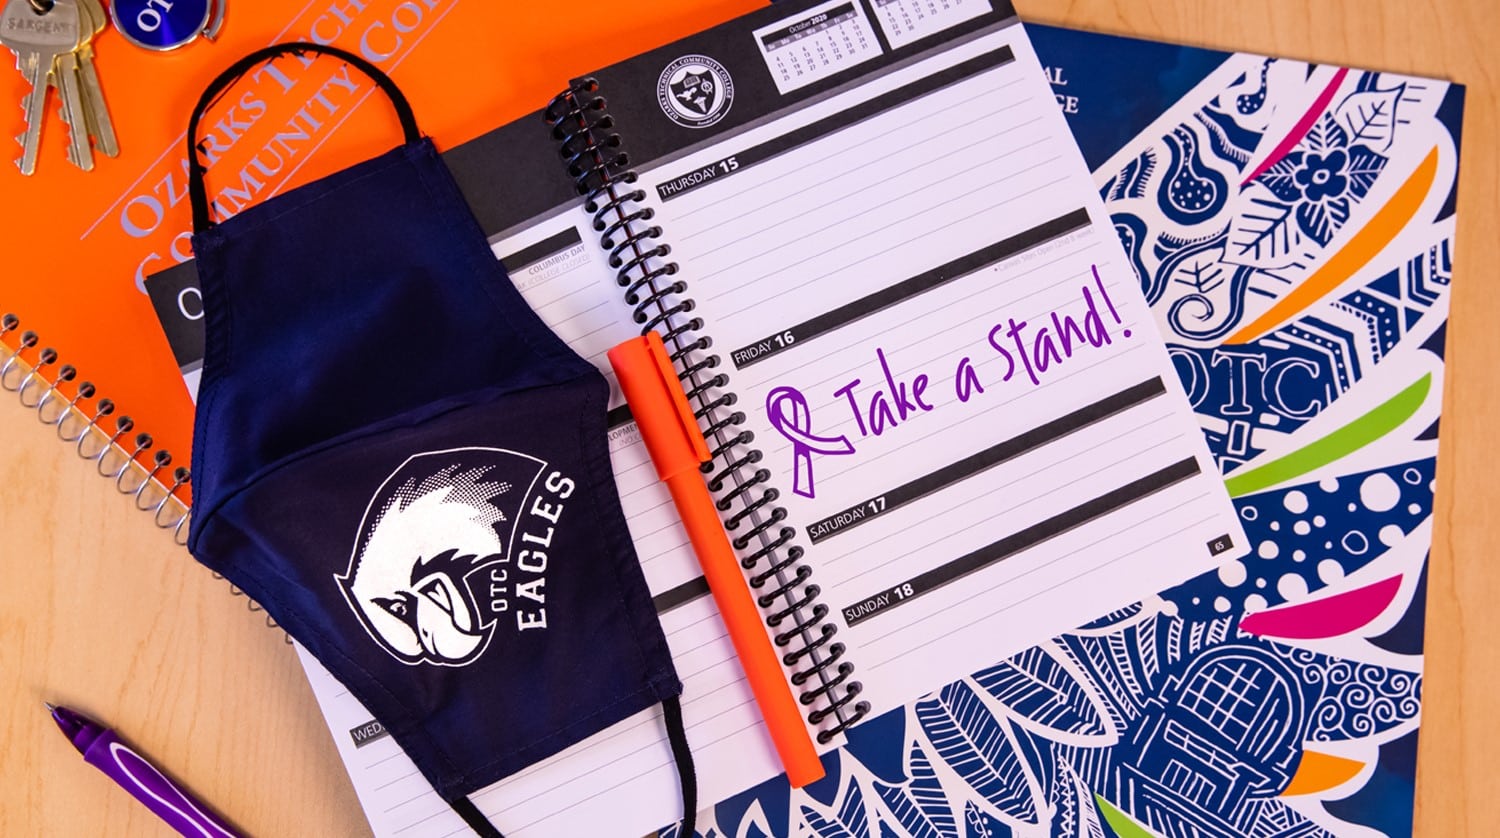 OTC planner with "take a stand" written on the page